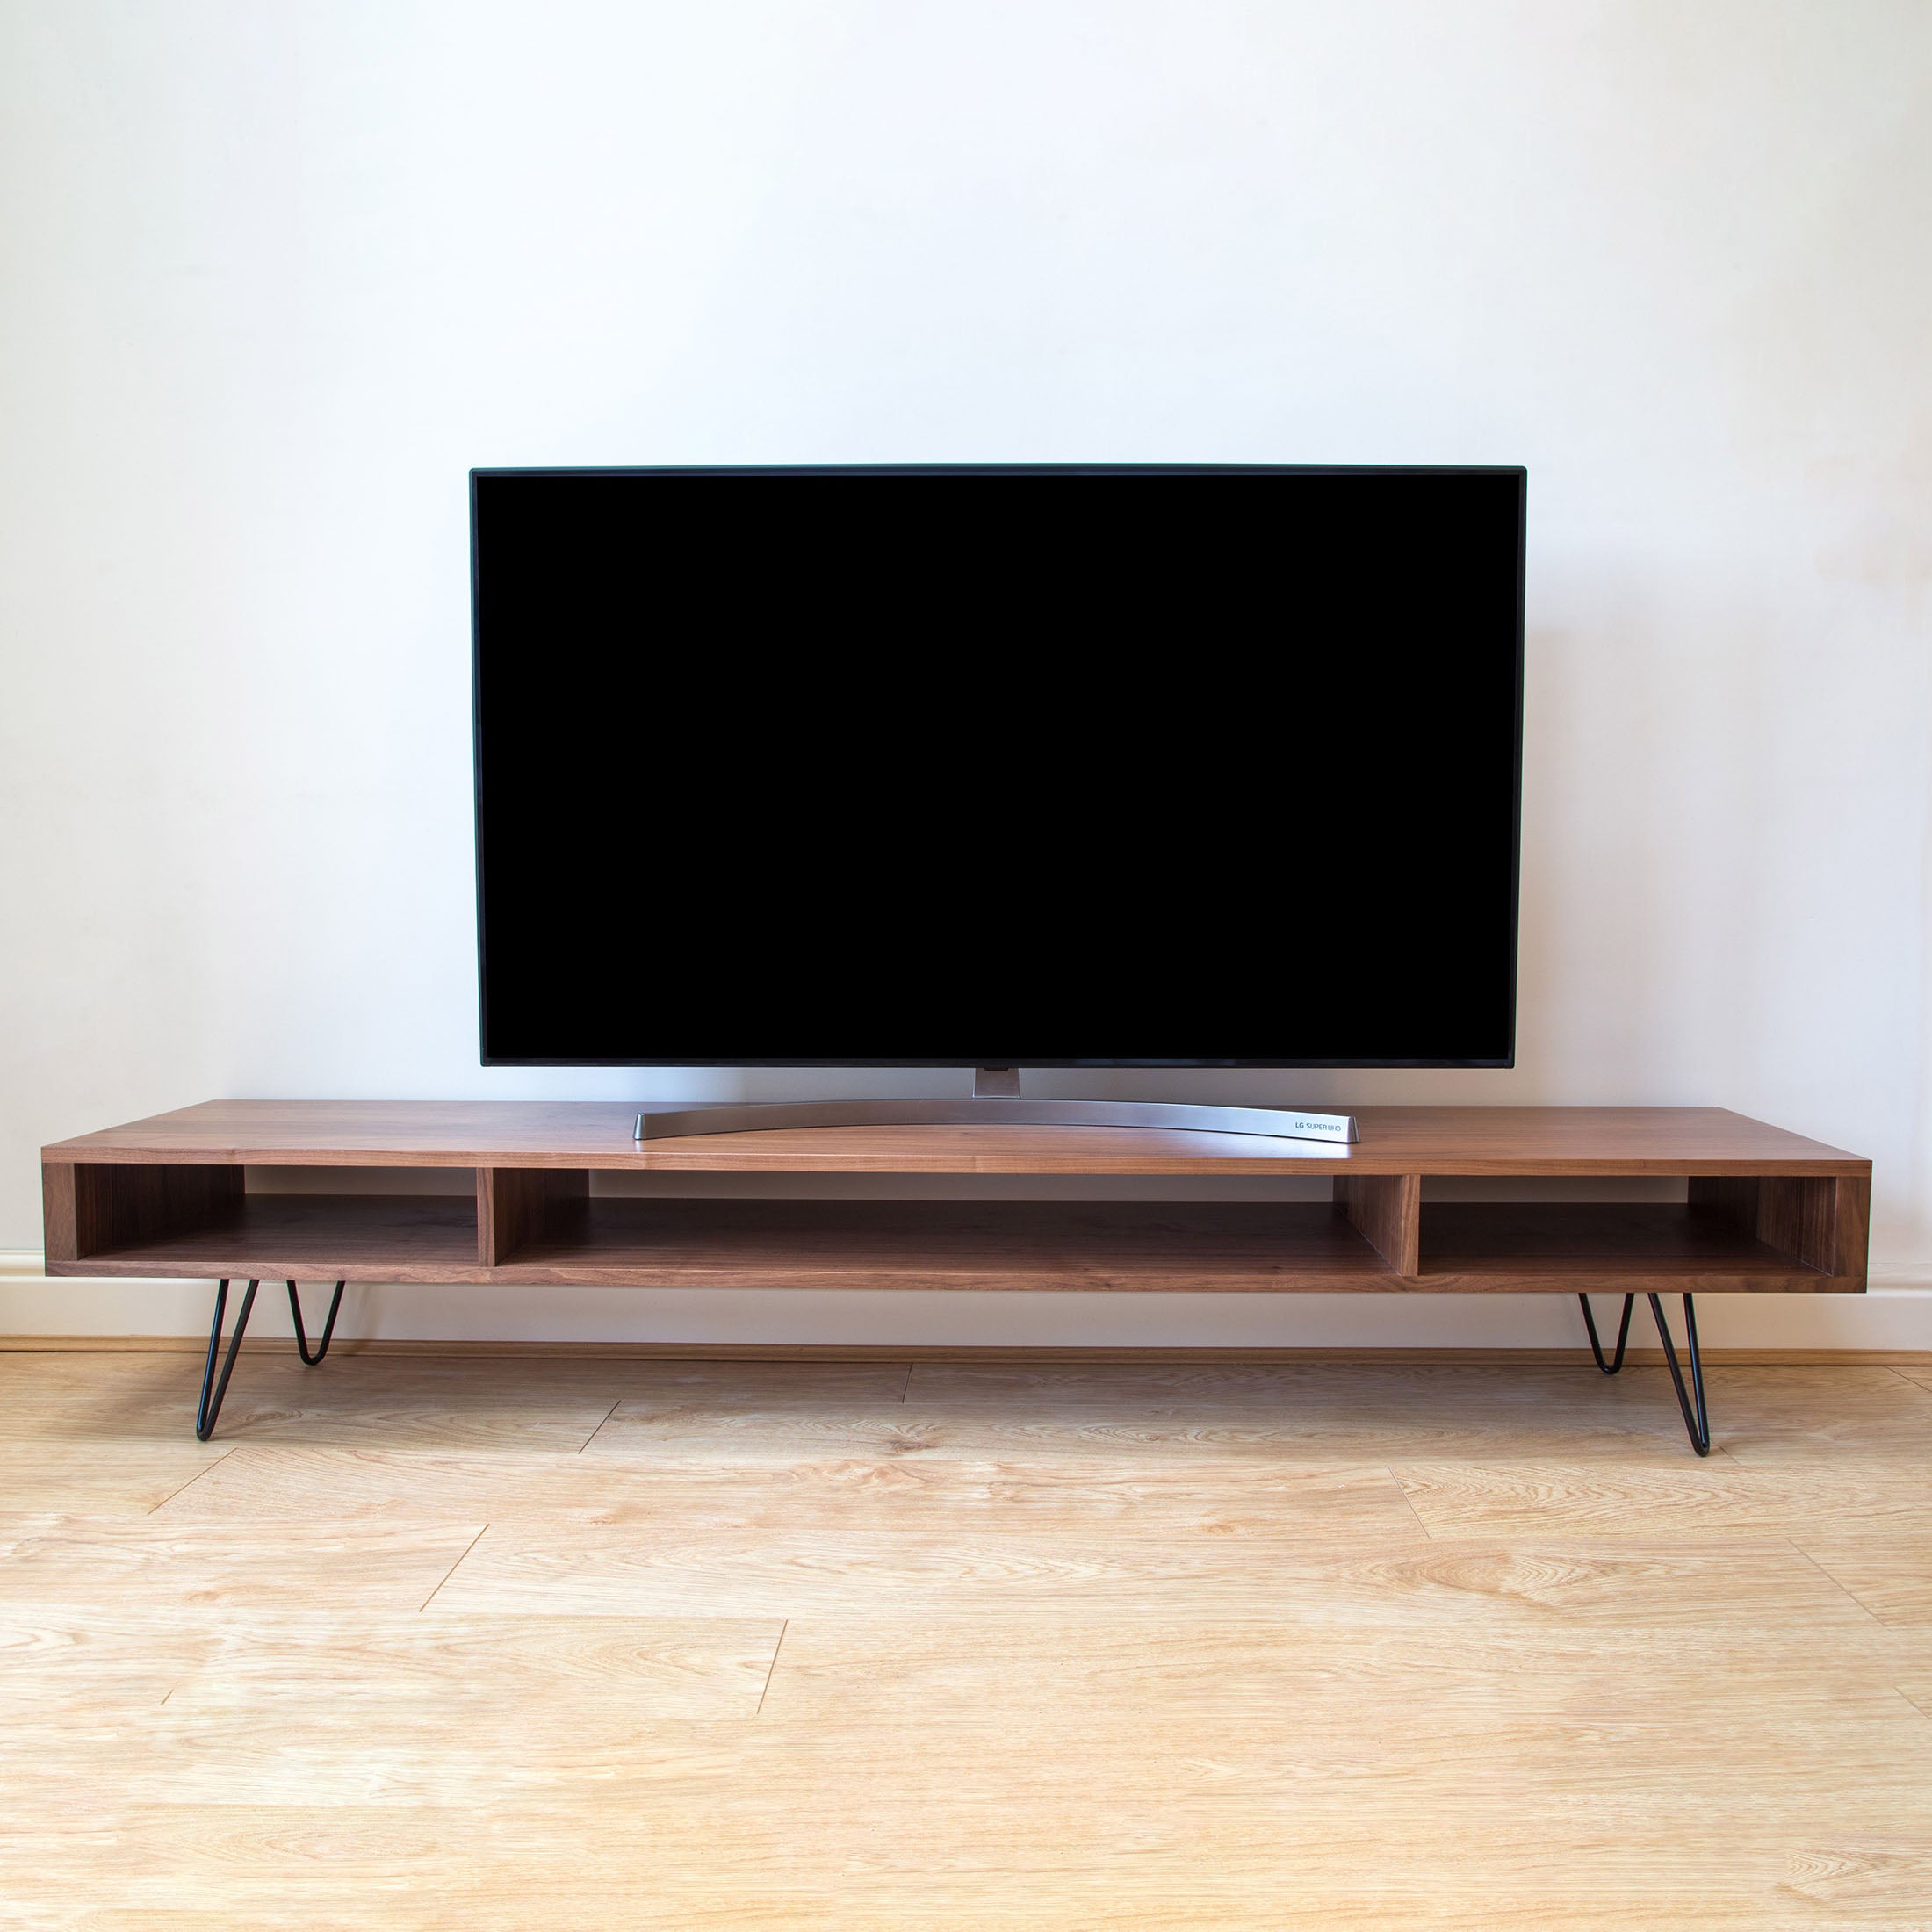 TV stand with hairpin legs from solid walnut